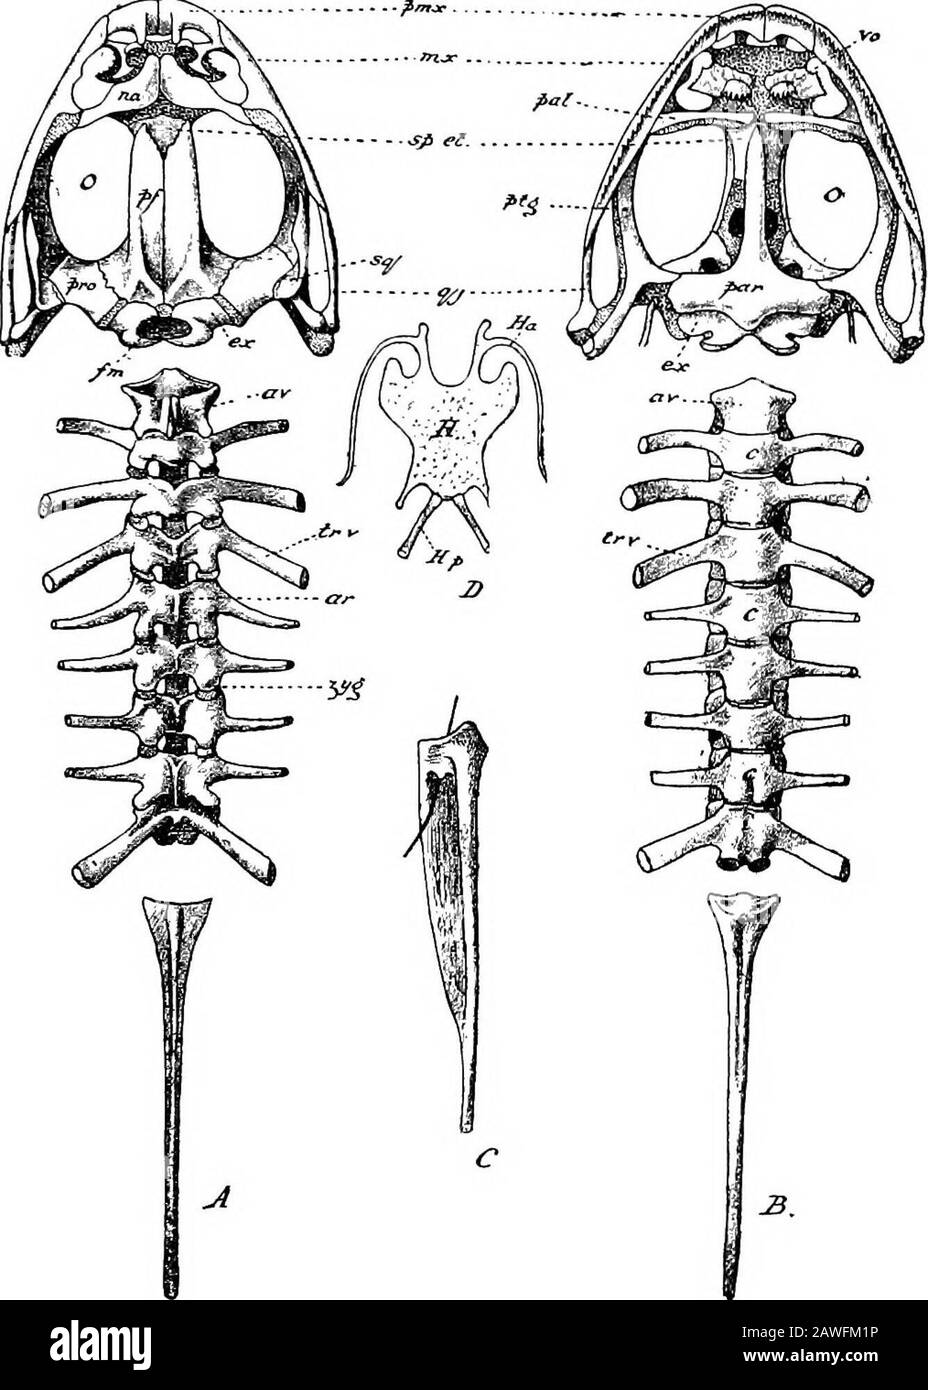 An introduction to the study of the comparative anatomy of animals . le of a certain amount of flexion, in virtue of the articula-tions of the centre and arches of its component vertebra. Thecolumn, especially its neural and transverse processes, servesfor the attachment of some of the most important muscles ofthe trunk. The skull is articulated to the first vertebra by two pro-minences, known as the occipital condyles, which fit into itstwo concavities. The skulls of all the craniate vertebrates (by which wemean those vertebrate animals which have a distinct head)present certain features in c Stock Photo